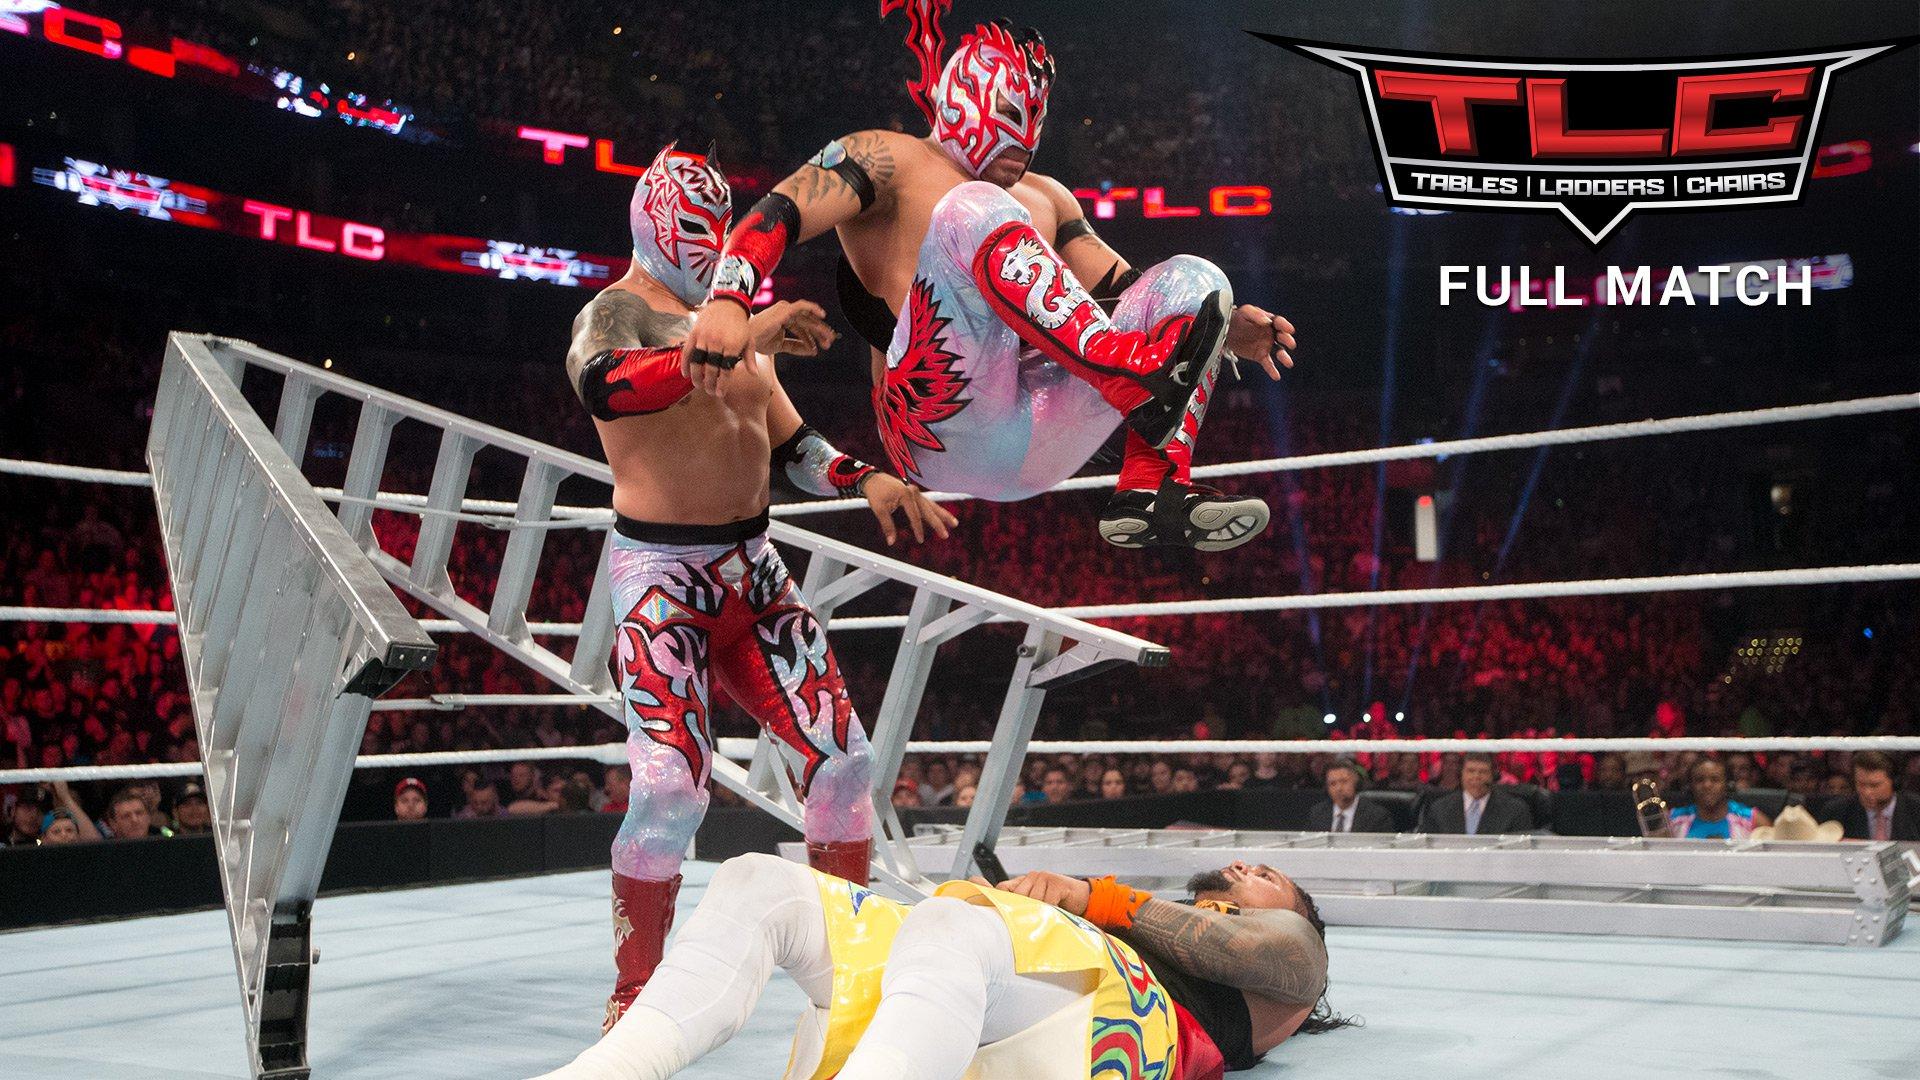 The Usos vs. The New Day vs. Lucha Dragons Tag Team Title